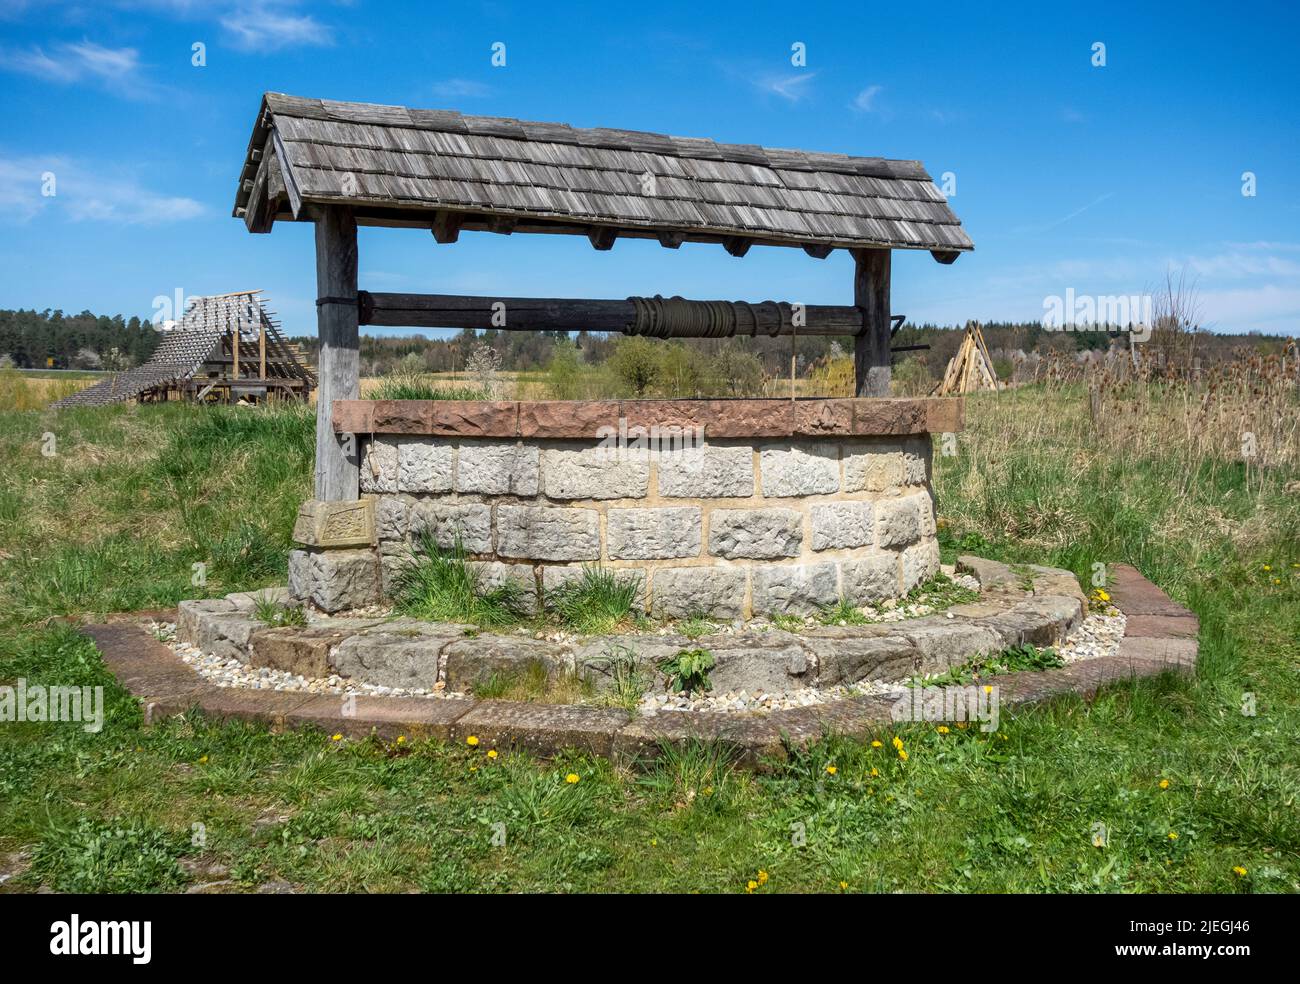 Medieval draw well in sunny ambiance at early spring time Stock Photo